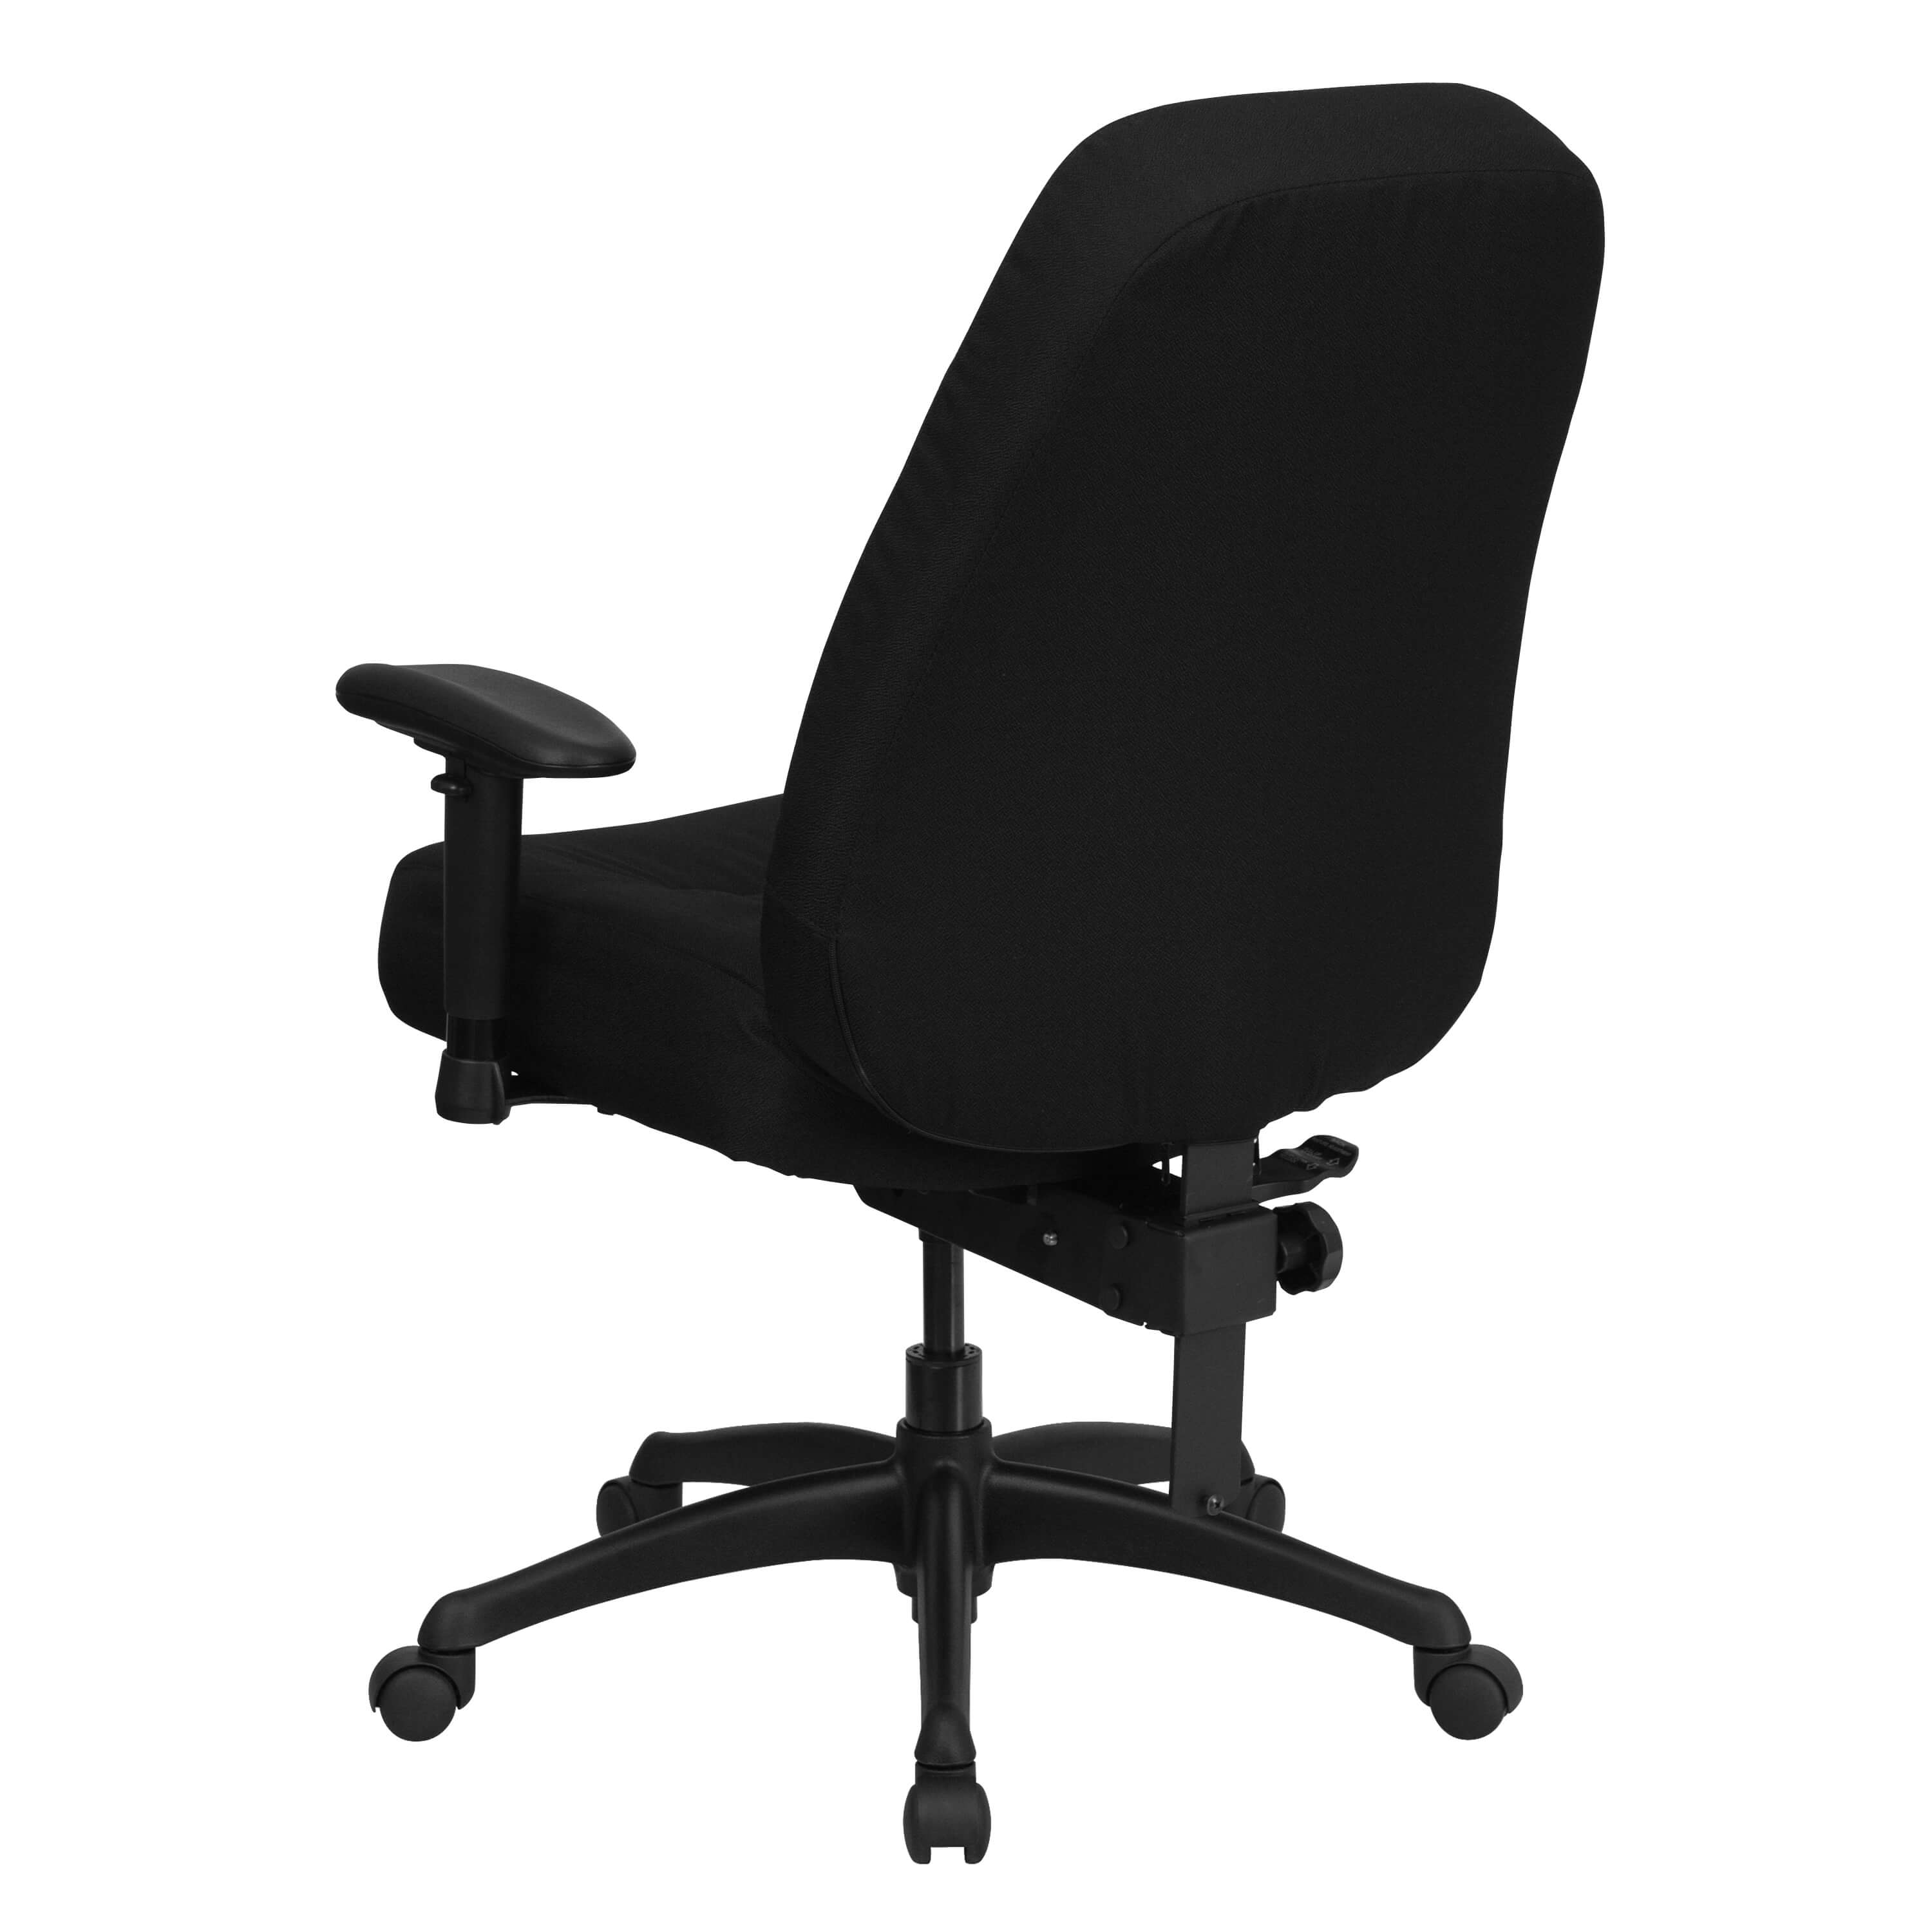 Heavy weight capacity office chair back view